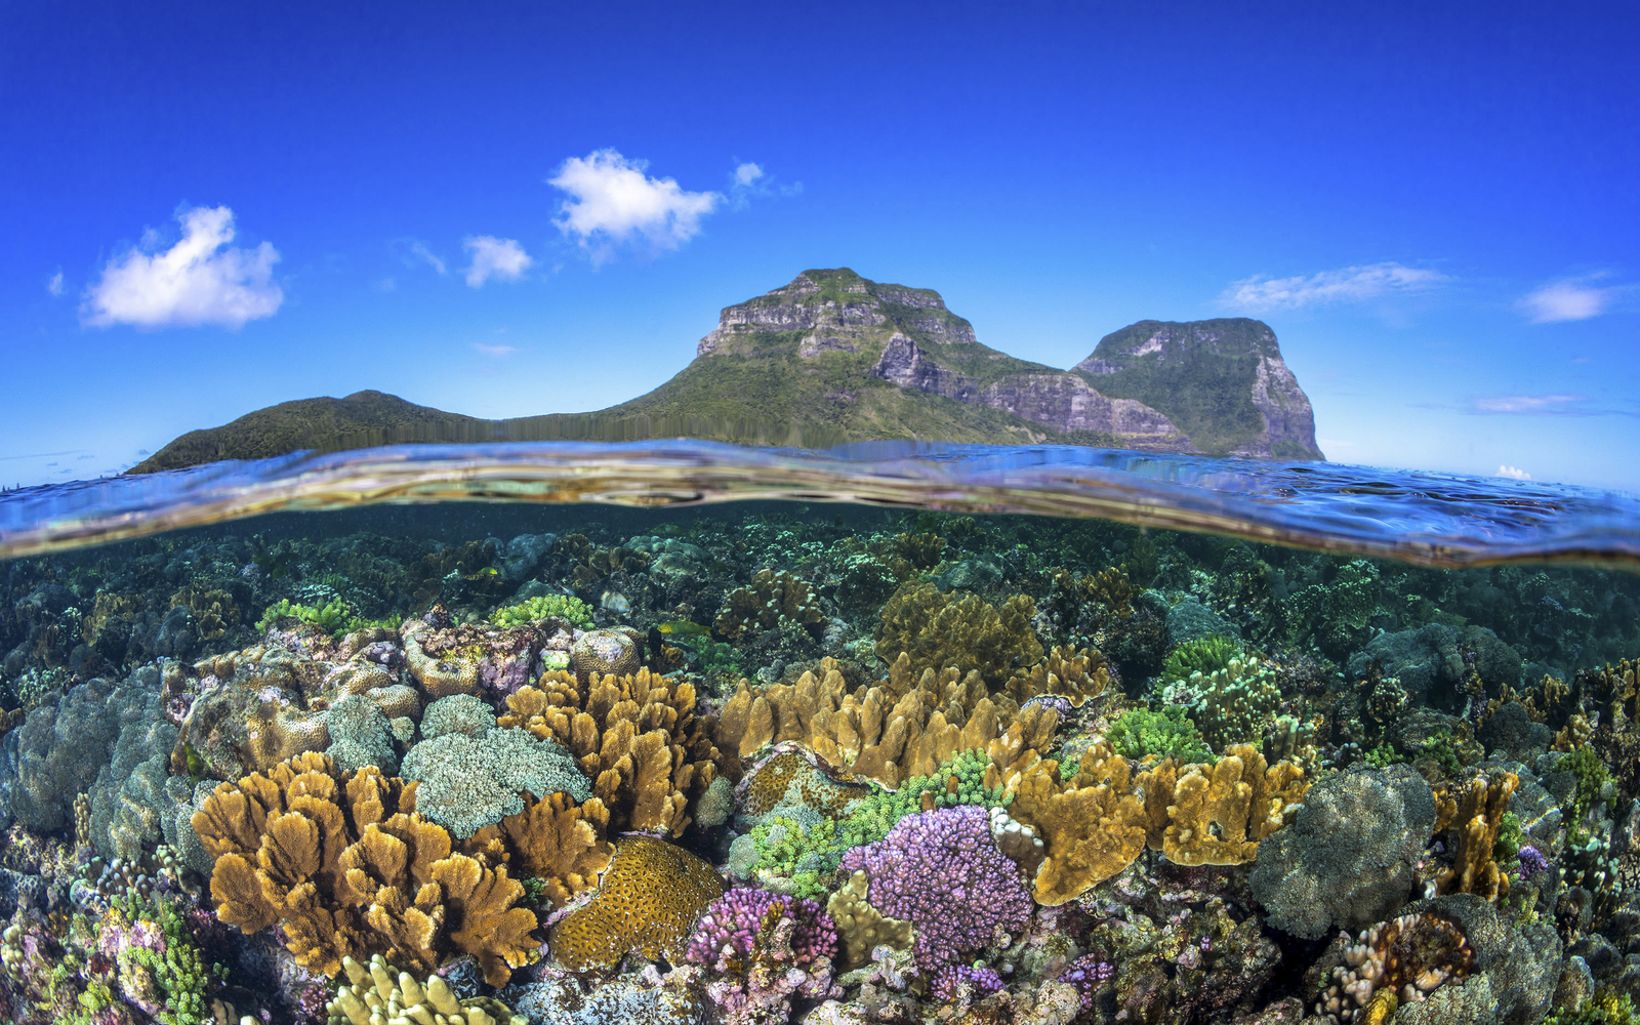 Healthy coral in the lagoon below Mount Gower and Mount Lidgbird on Lord Howe Island. 